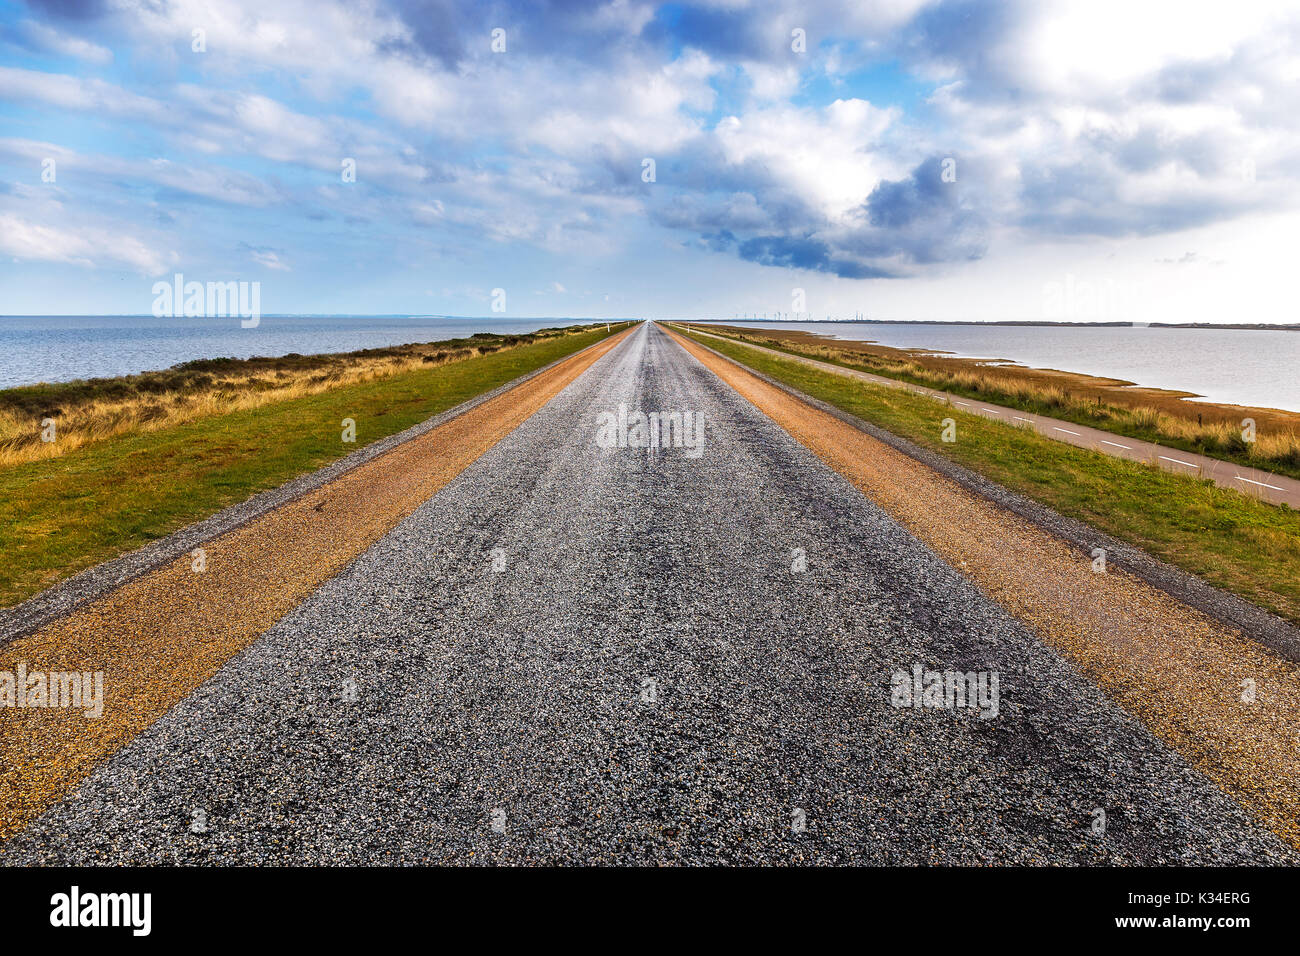 The Road from Agger Tange to the Thyboron Ferry Stock Photo